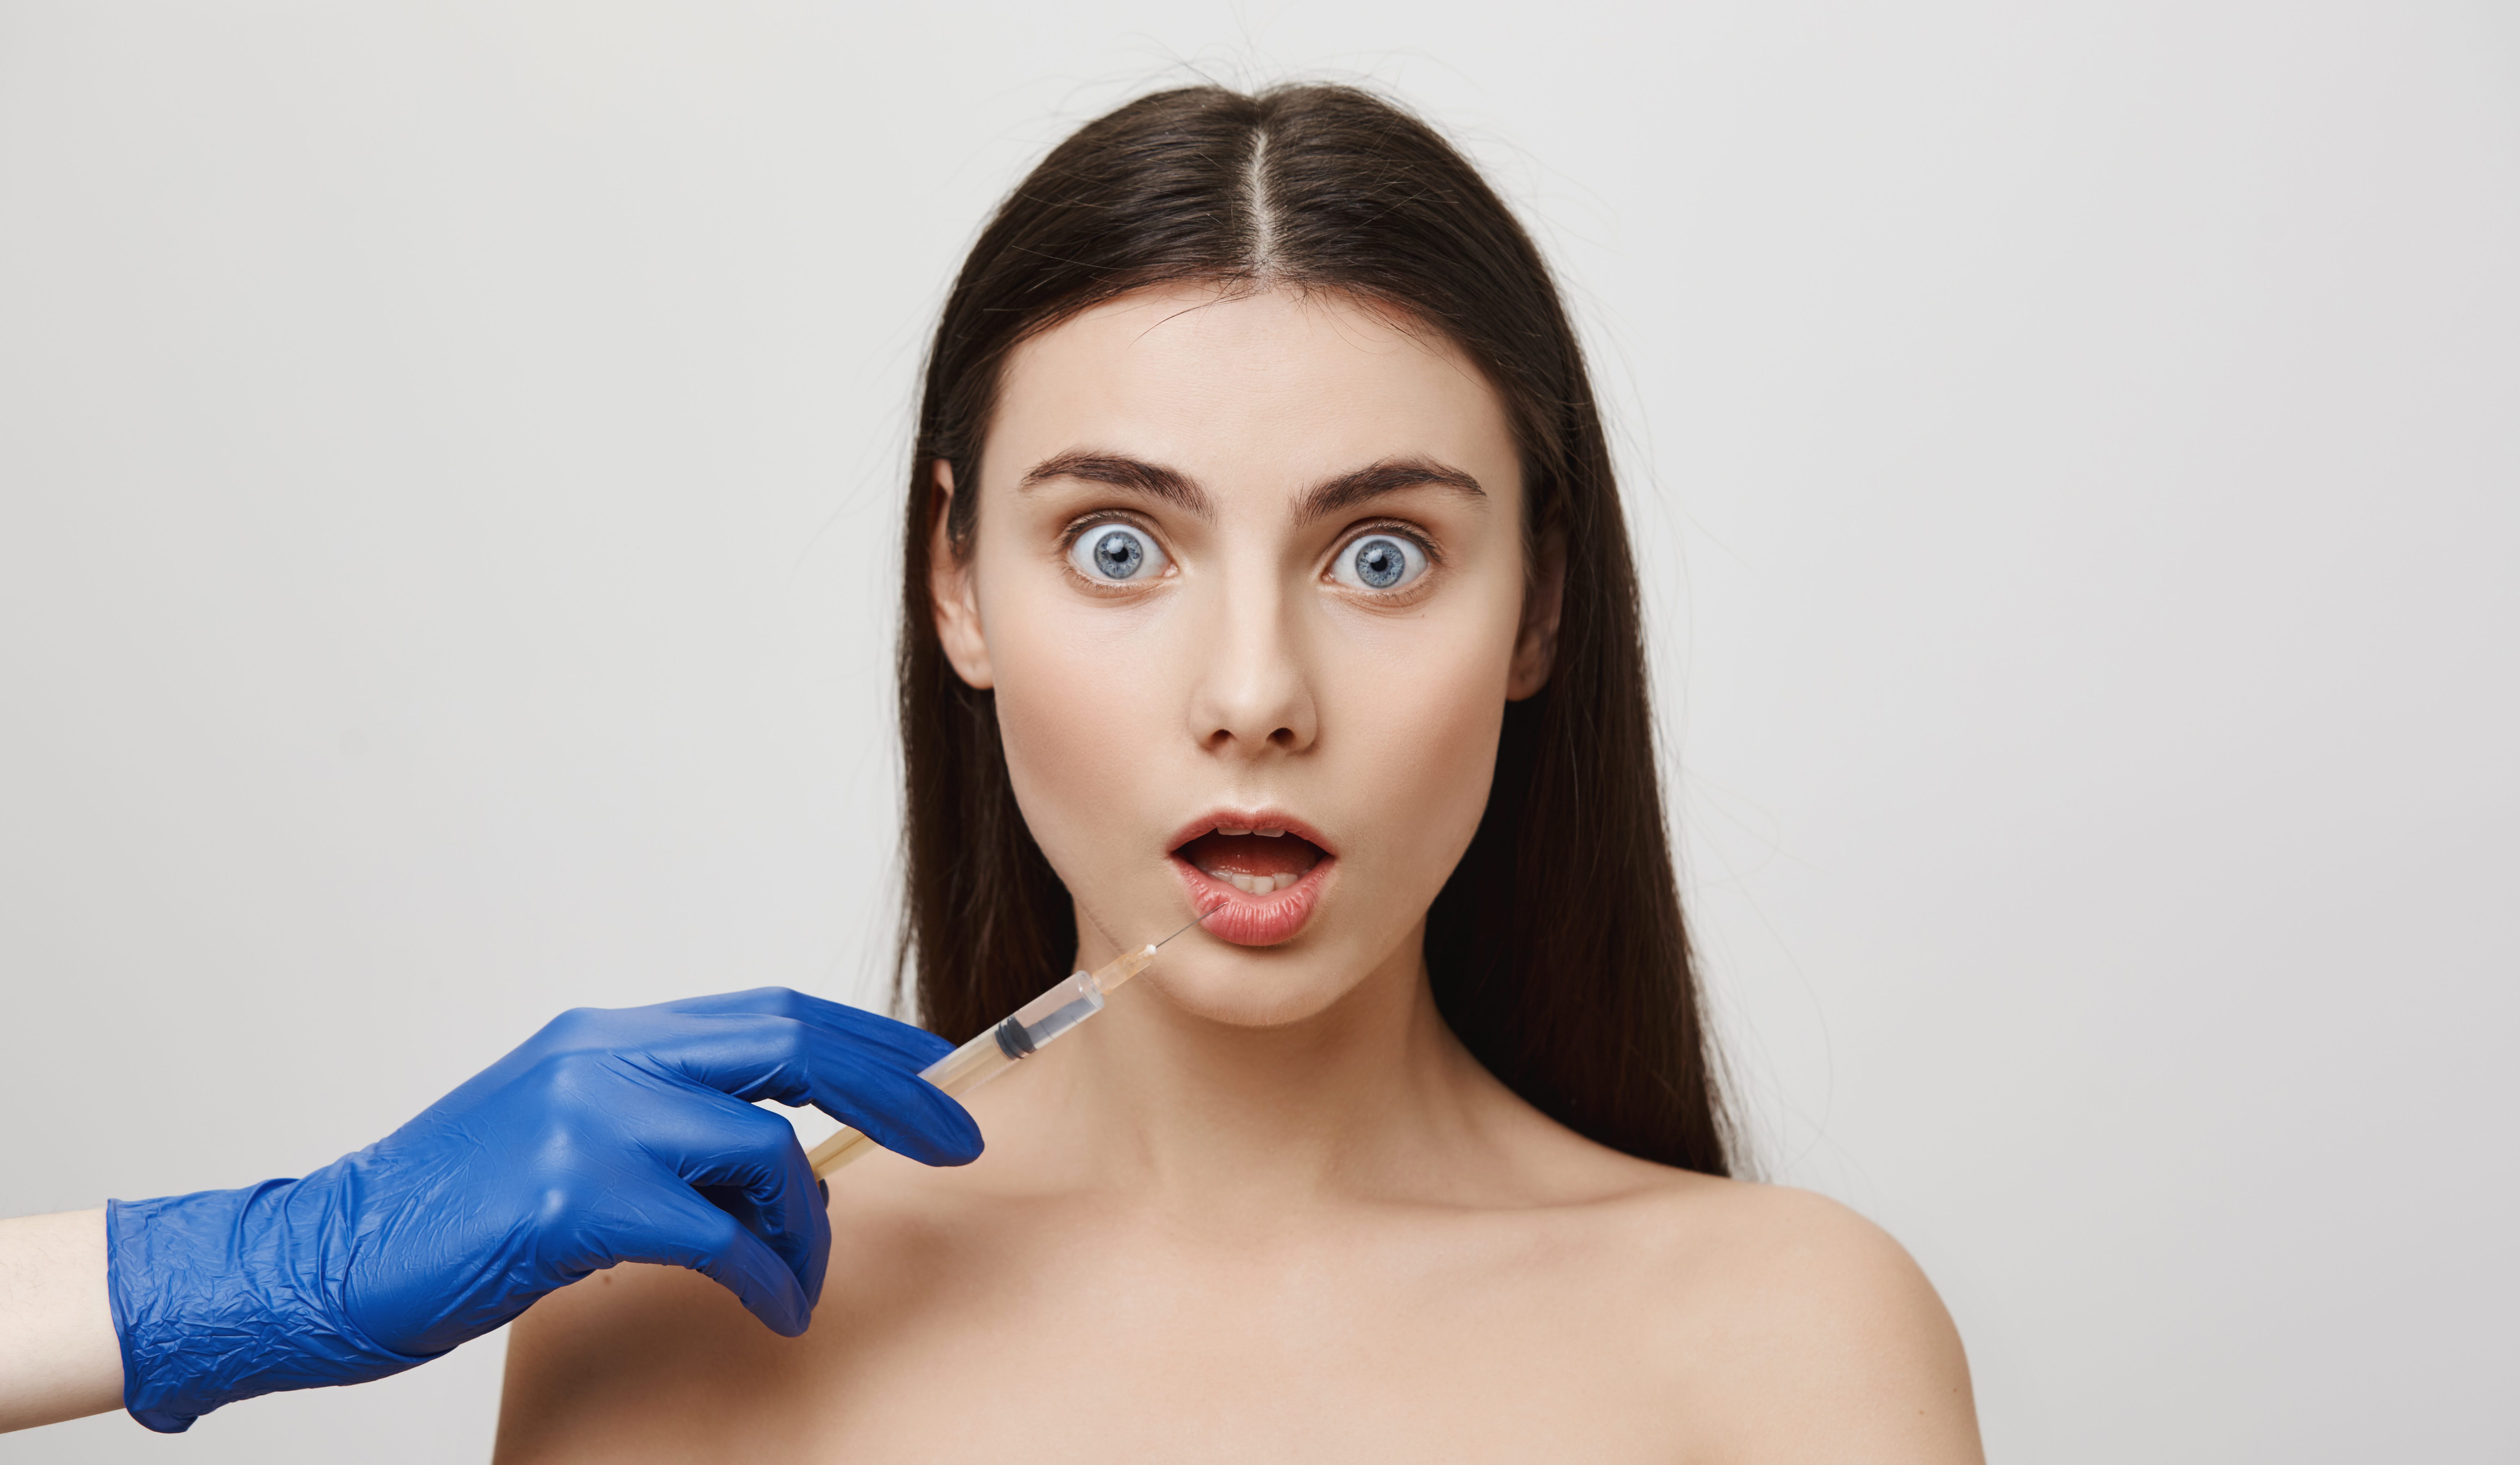 On her way to lip-augmentation. Portrait of nervous young woman receiving shot in lower lip from cosmetologist in medical glove, wanting to change her appearance and make face even more beautiful.